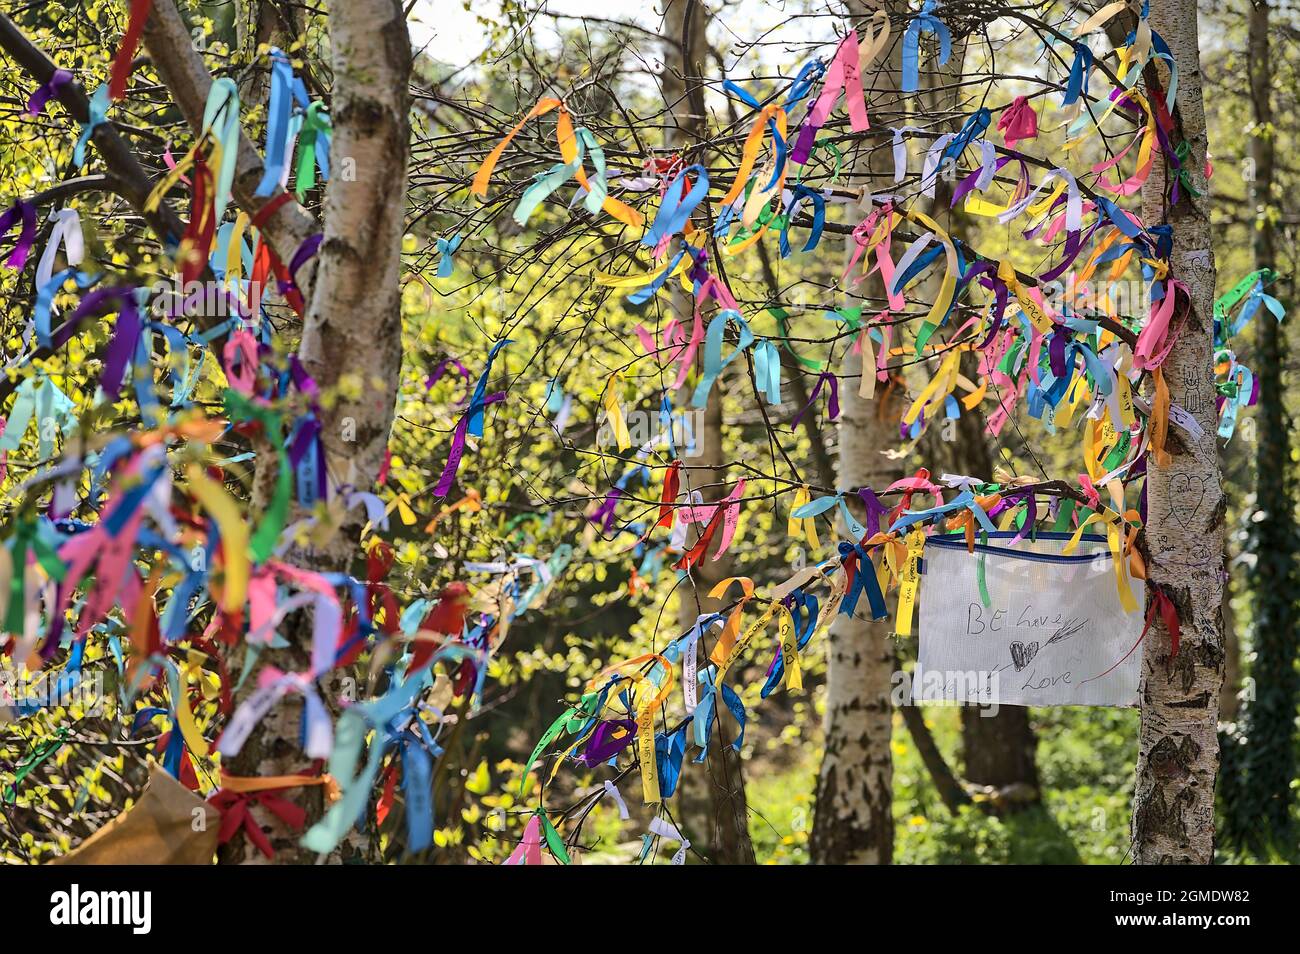 Be Love, We Are Love.Closeup view of many ribbons of different colors tied on branches of spring birch tree seen at university campus, Dublin, Ireland Stock Photo